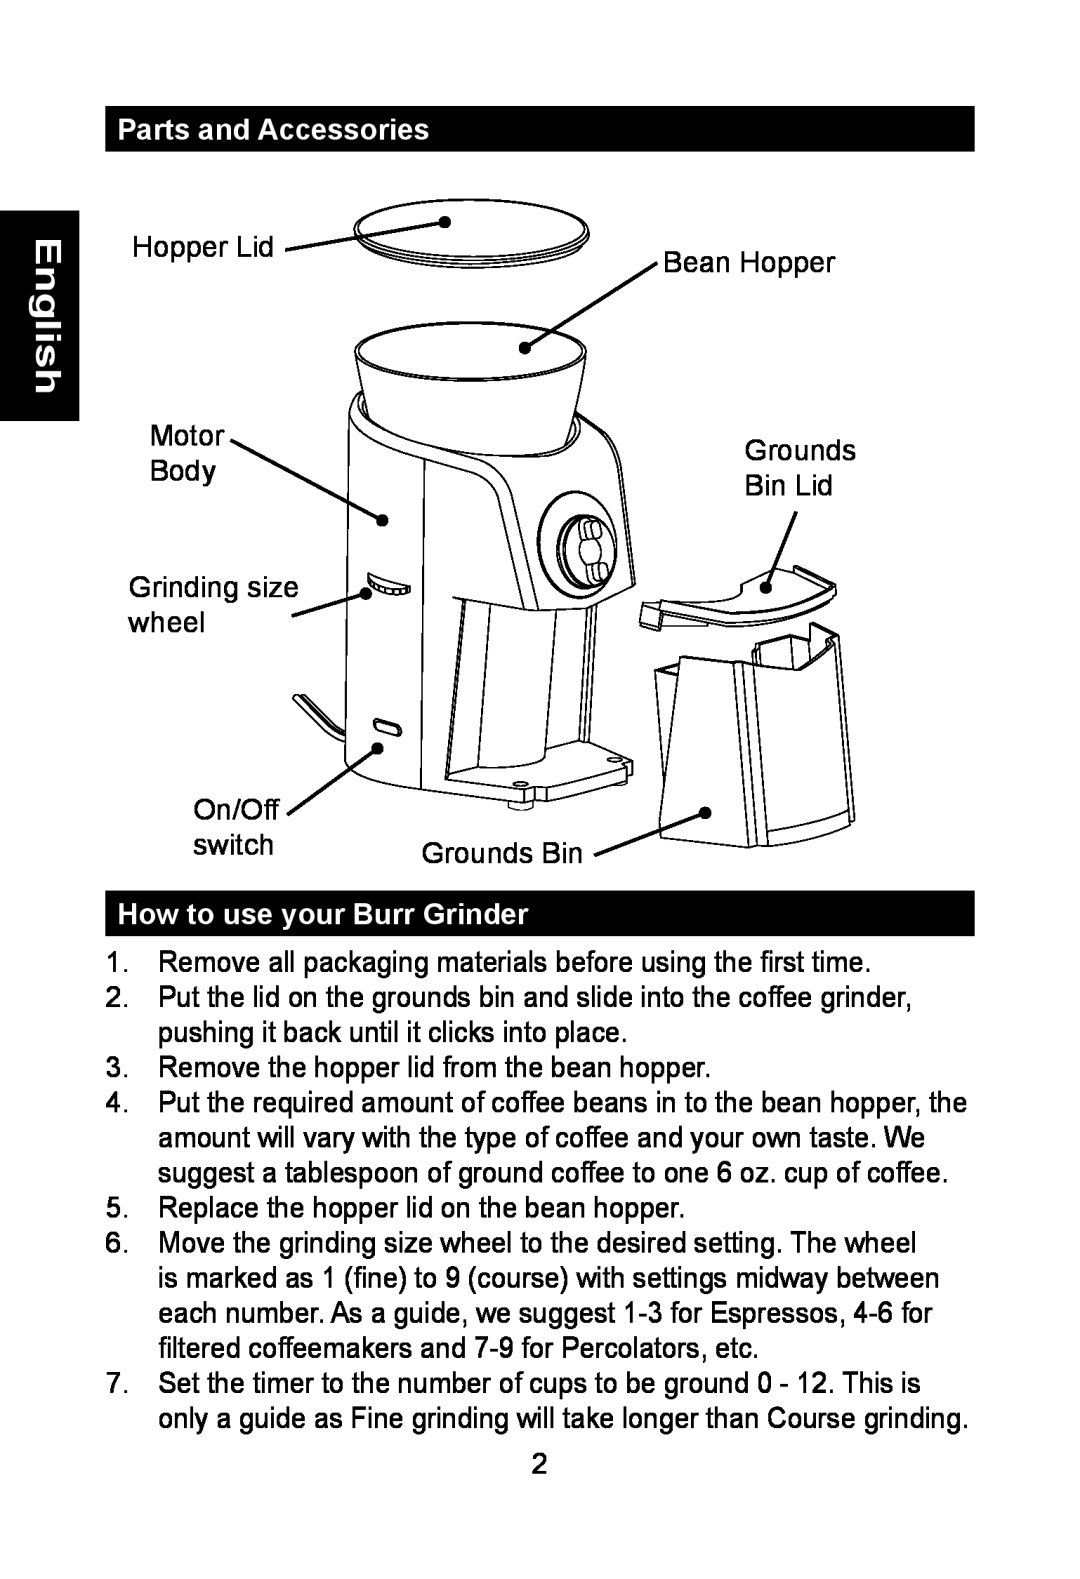 Nesco BG-88PR manual Parts and Accessories, How to use your Burr Grinder, English 